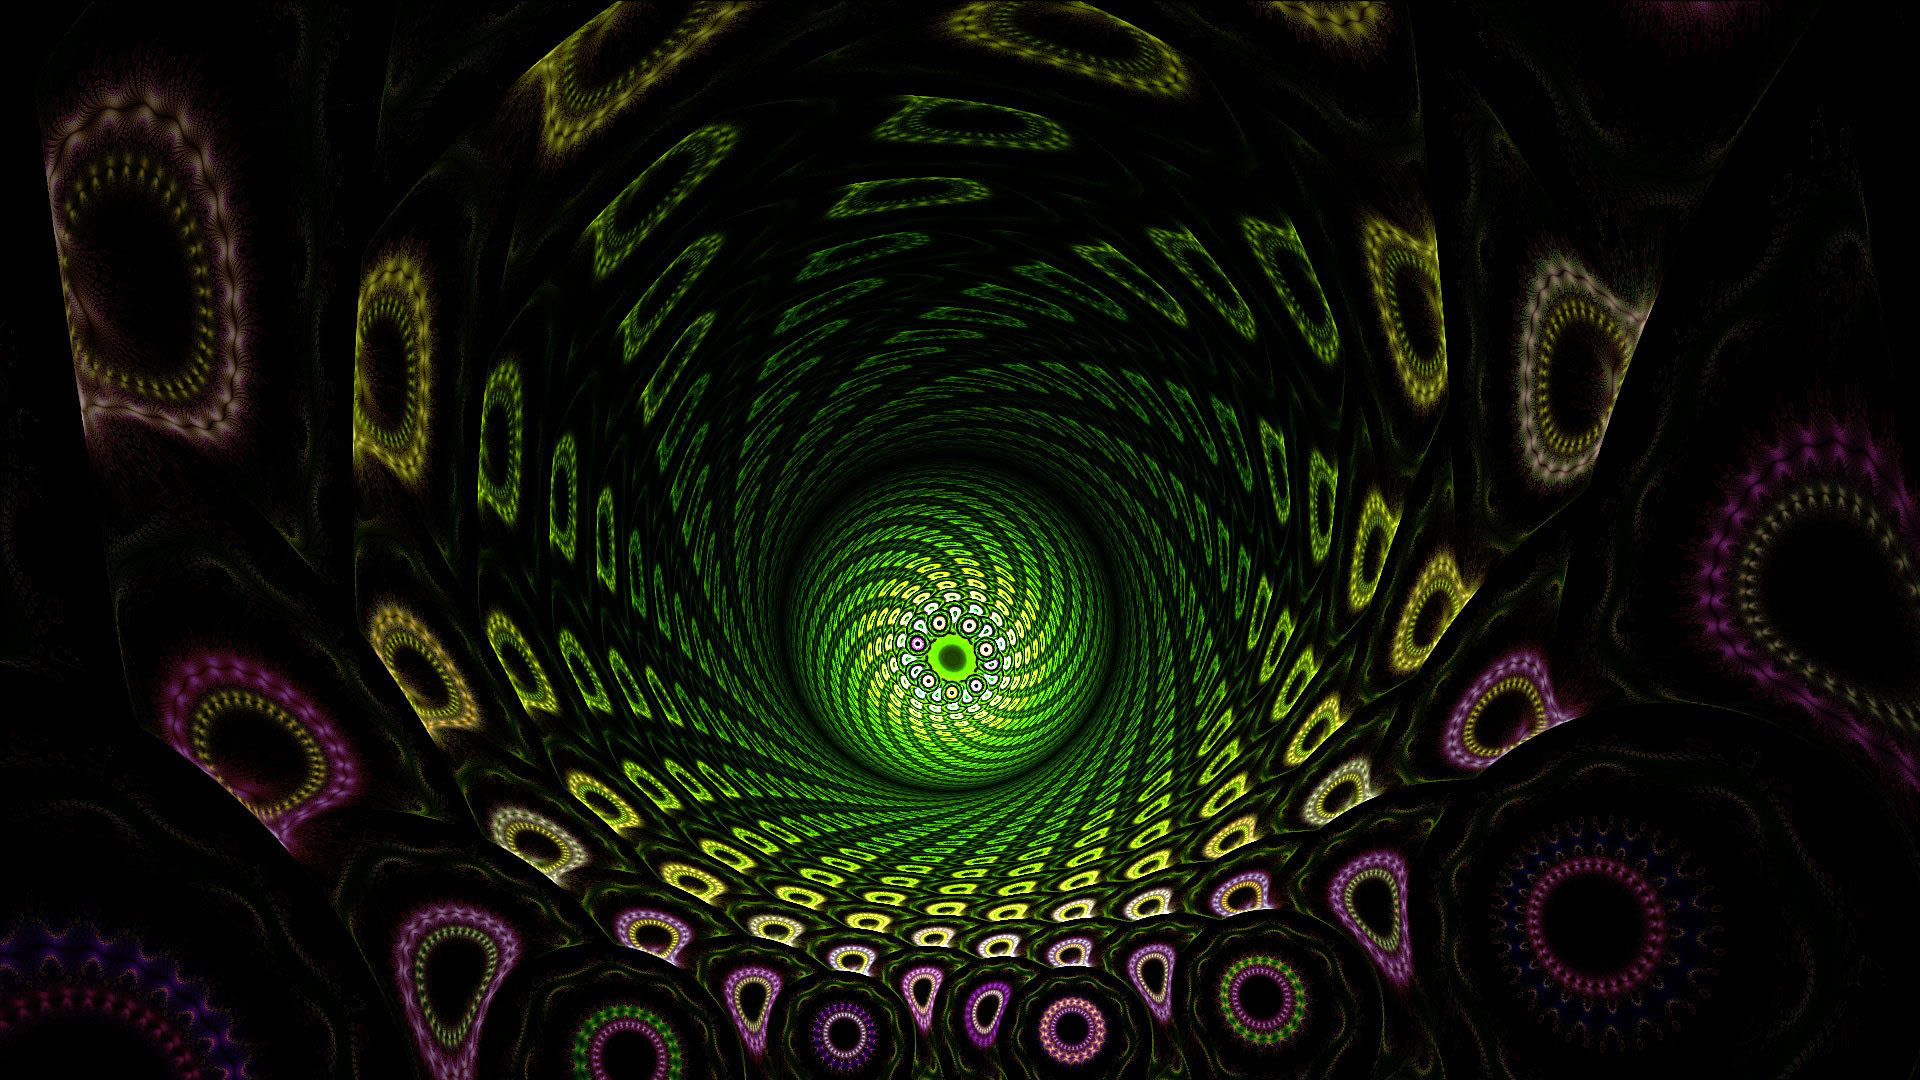 Green fractal with a swirling funnel